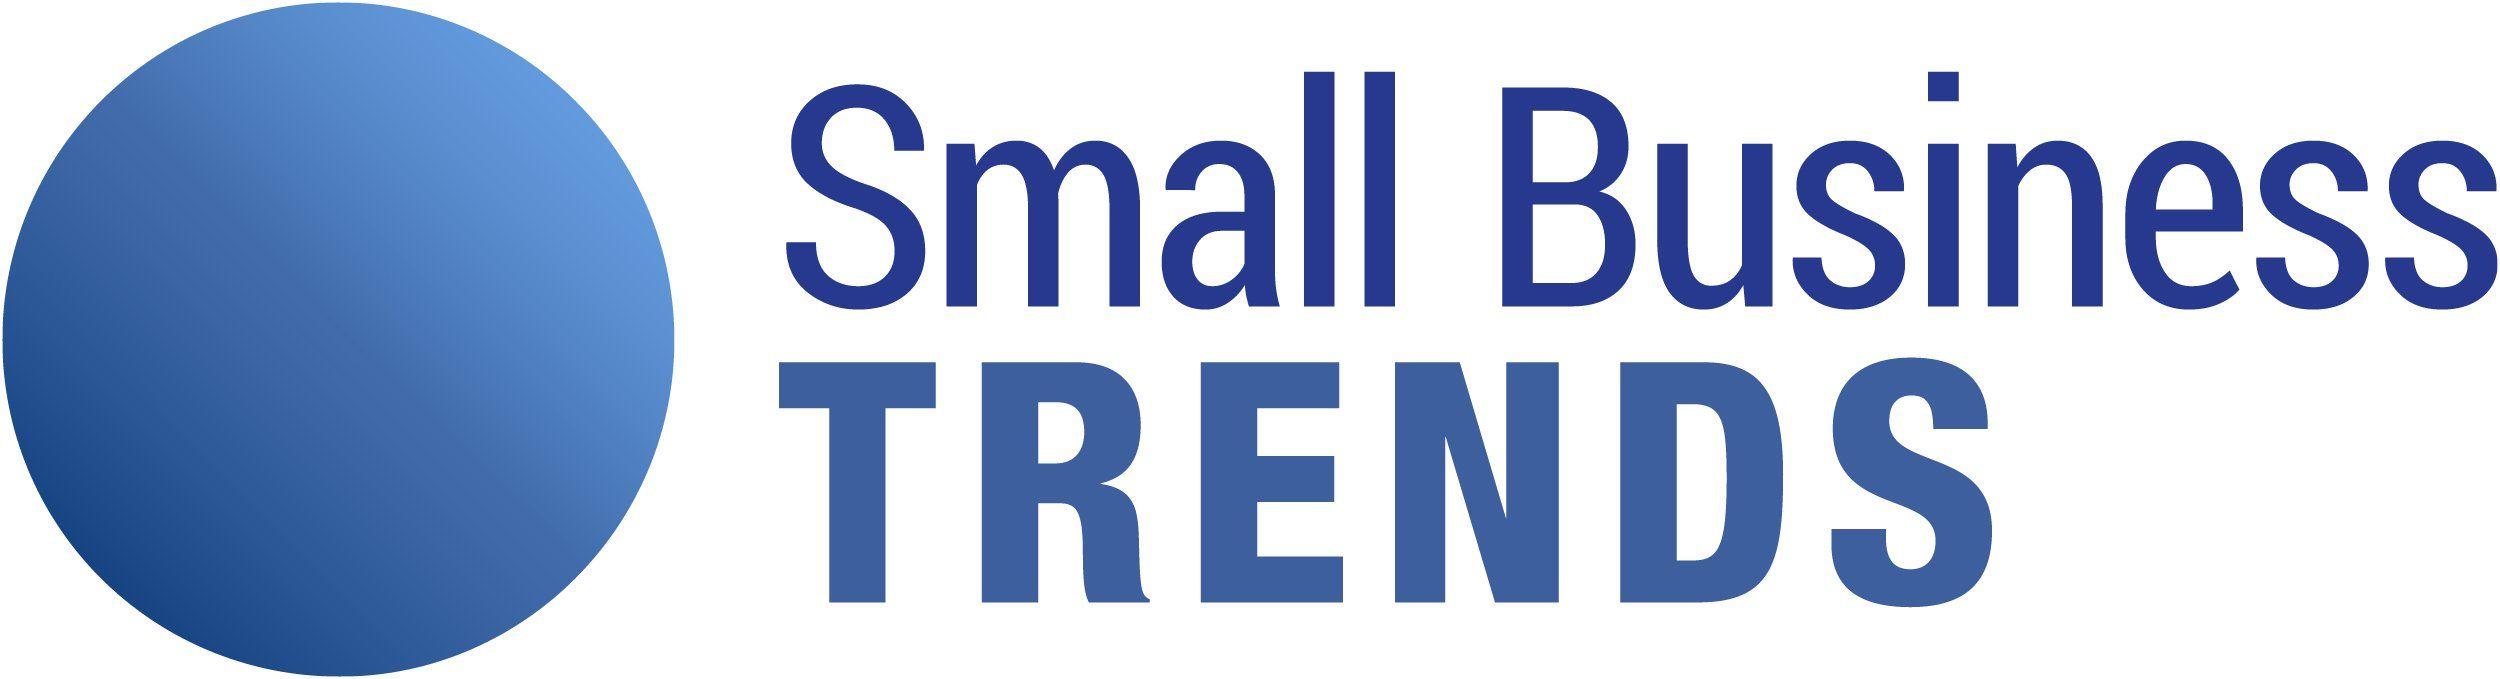 Small Business Logo - Small Business Trends Logo - Small Business Trends